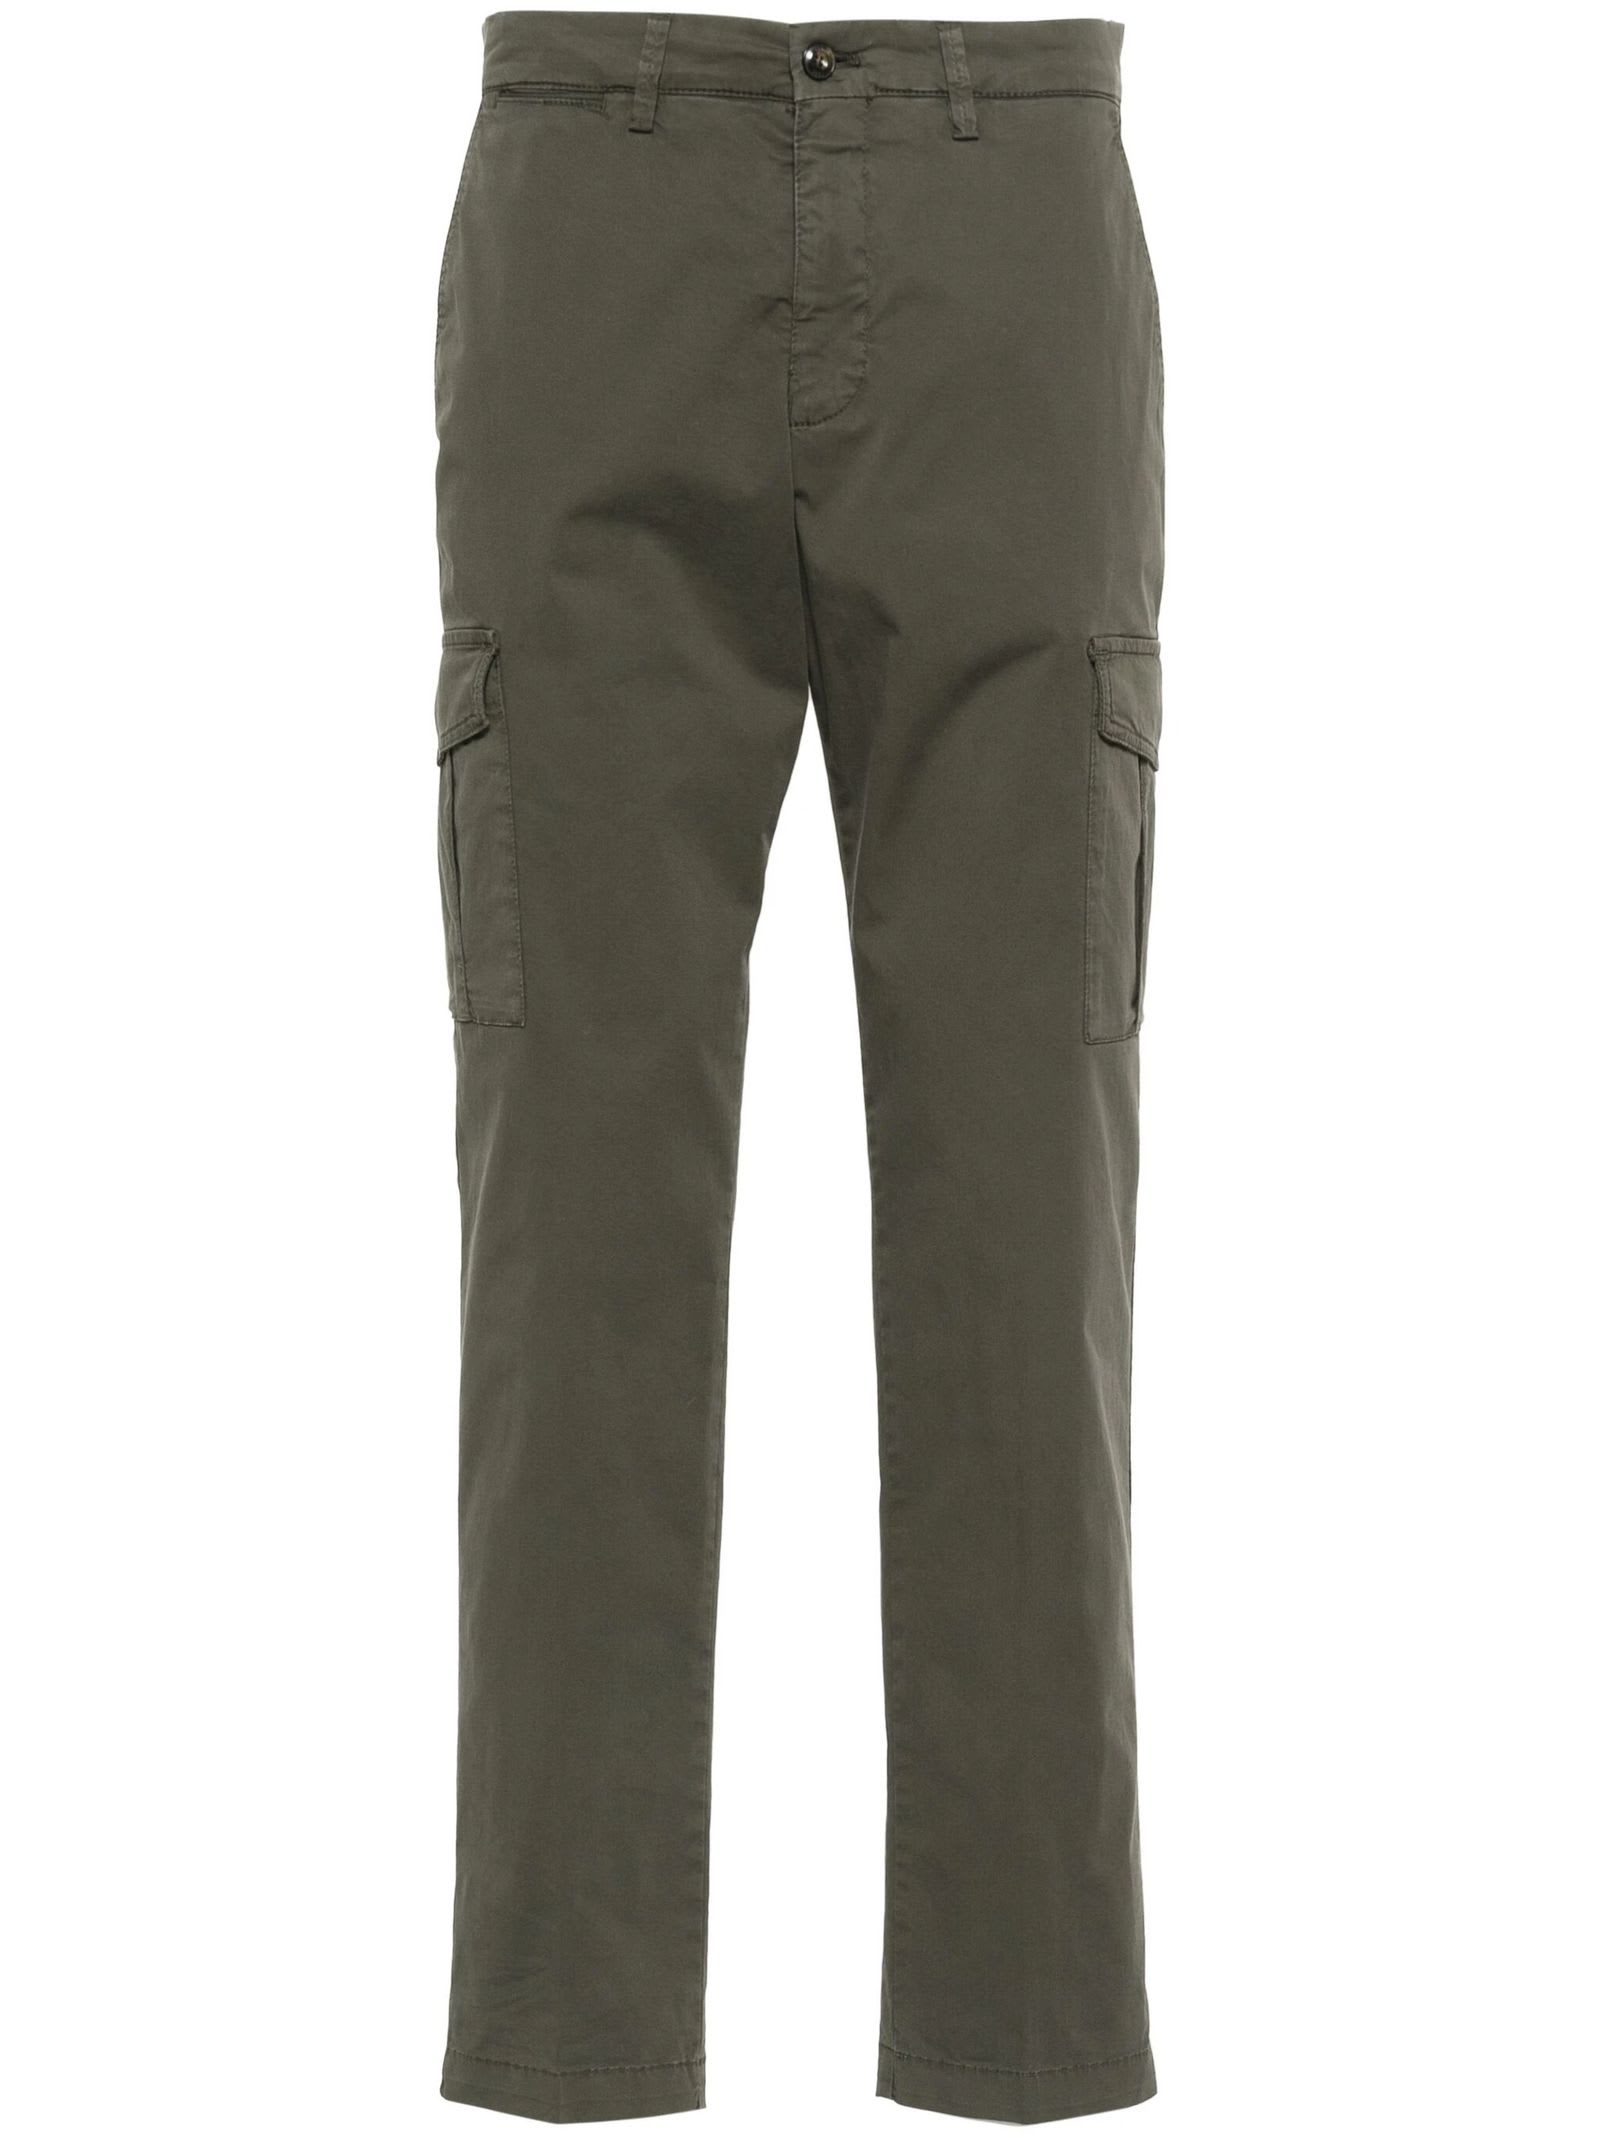 1949 Annapolis Olive Green Cotton Trousers